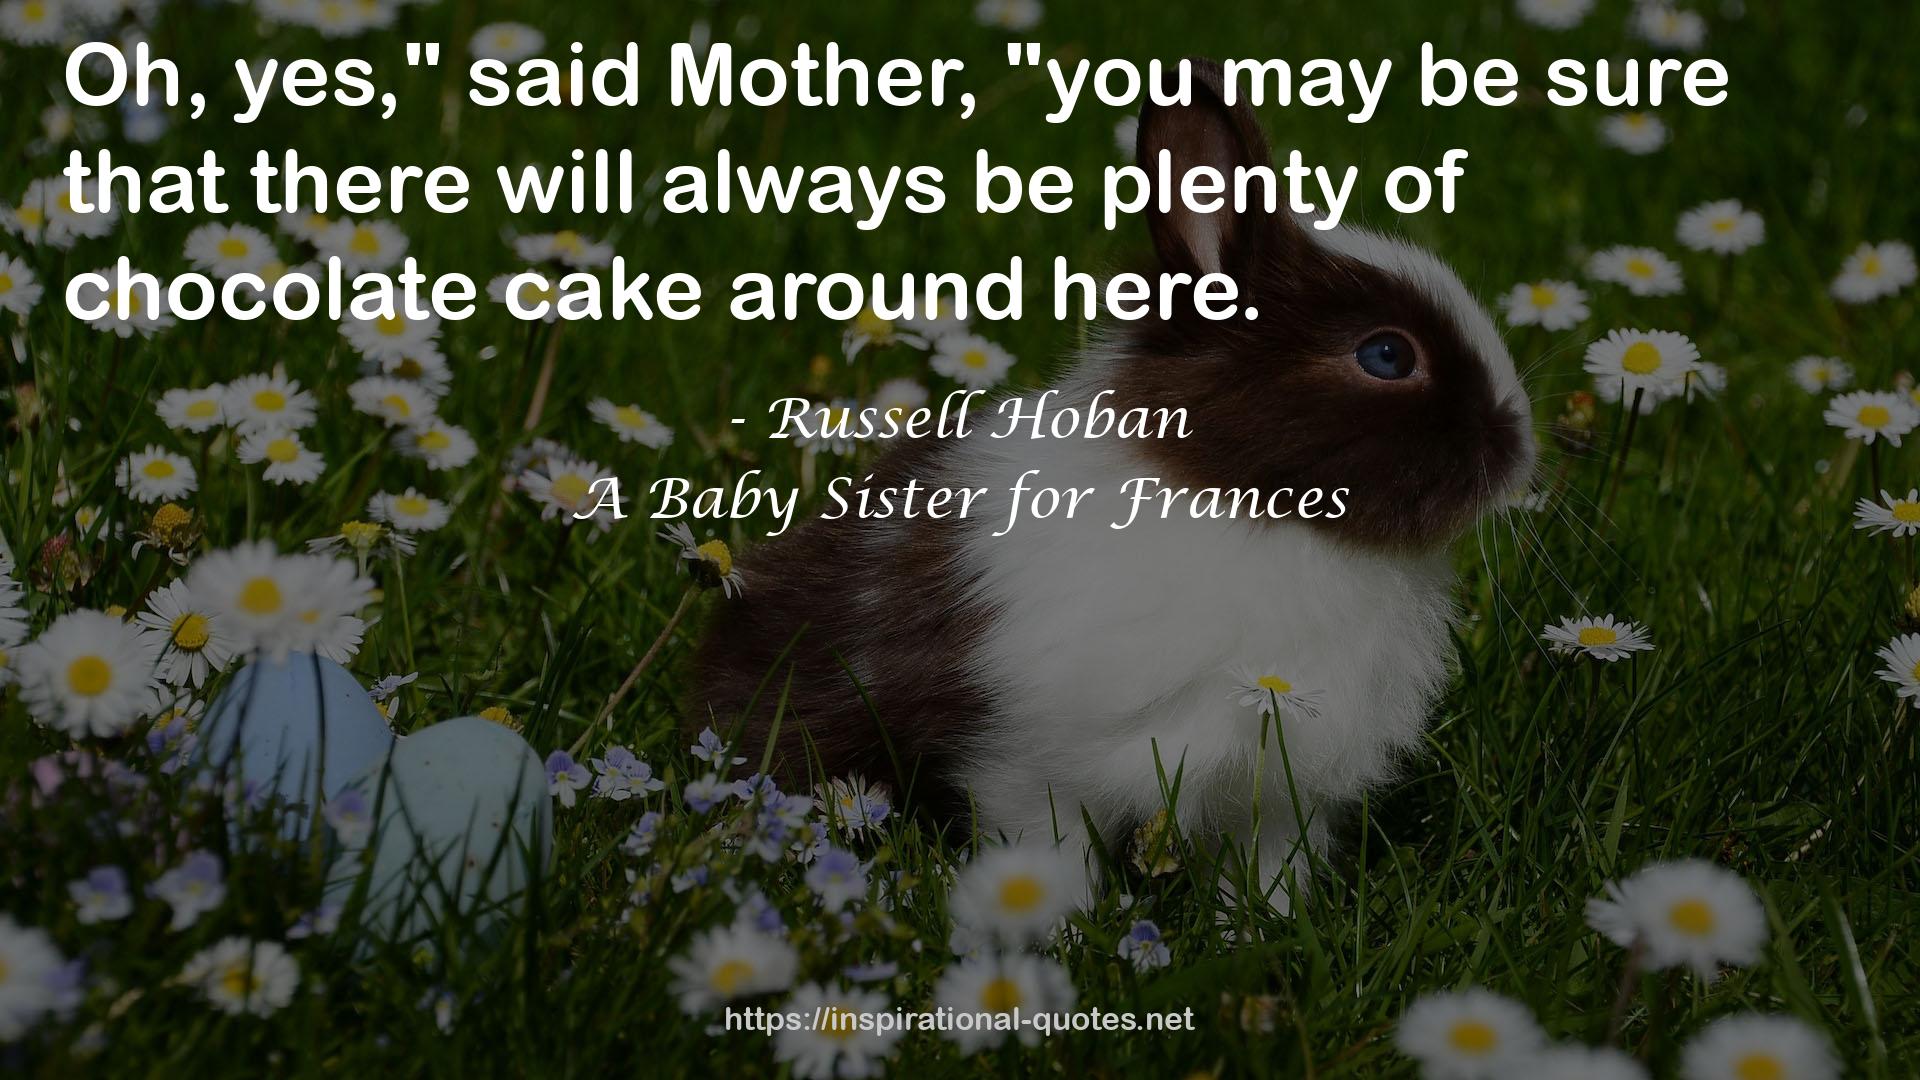 A Baby Sister for Frances QUOTES